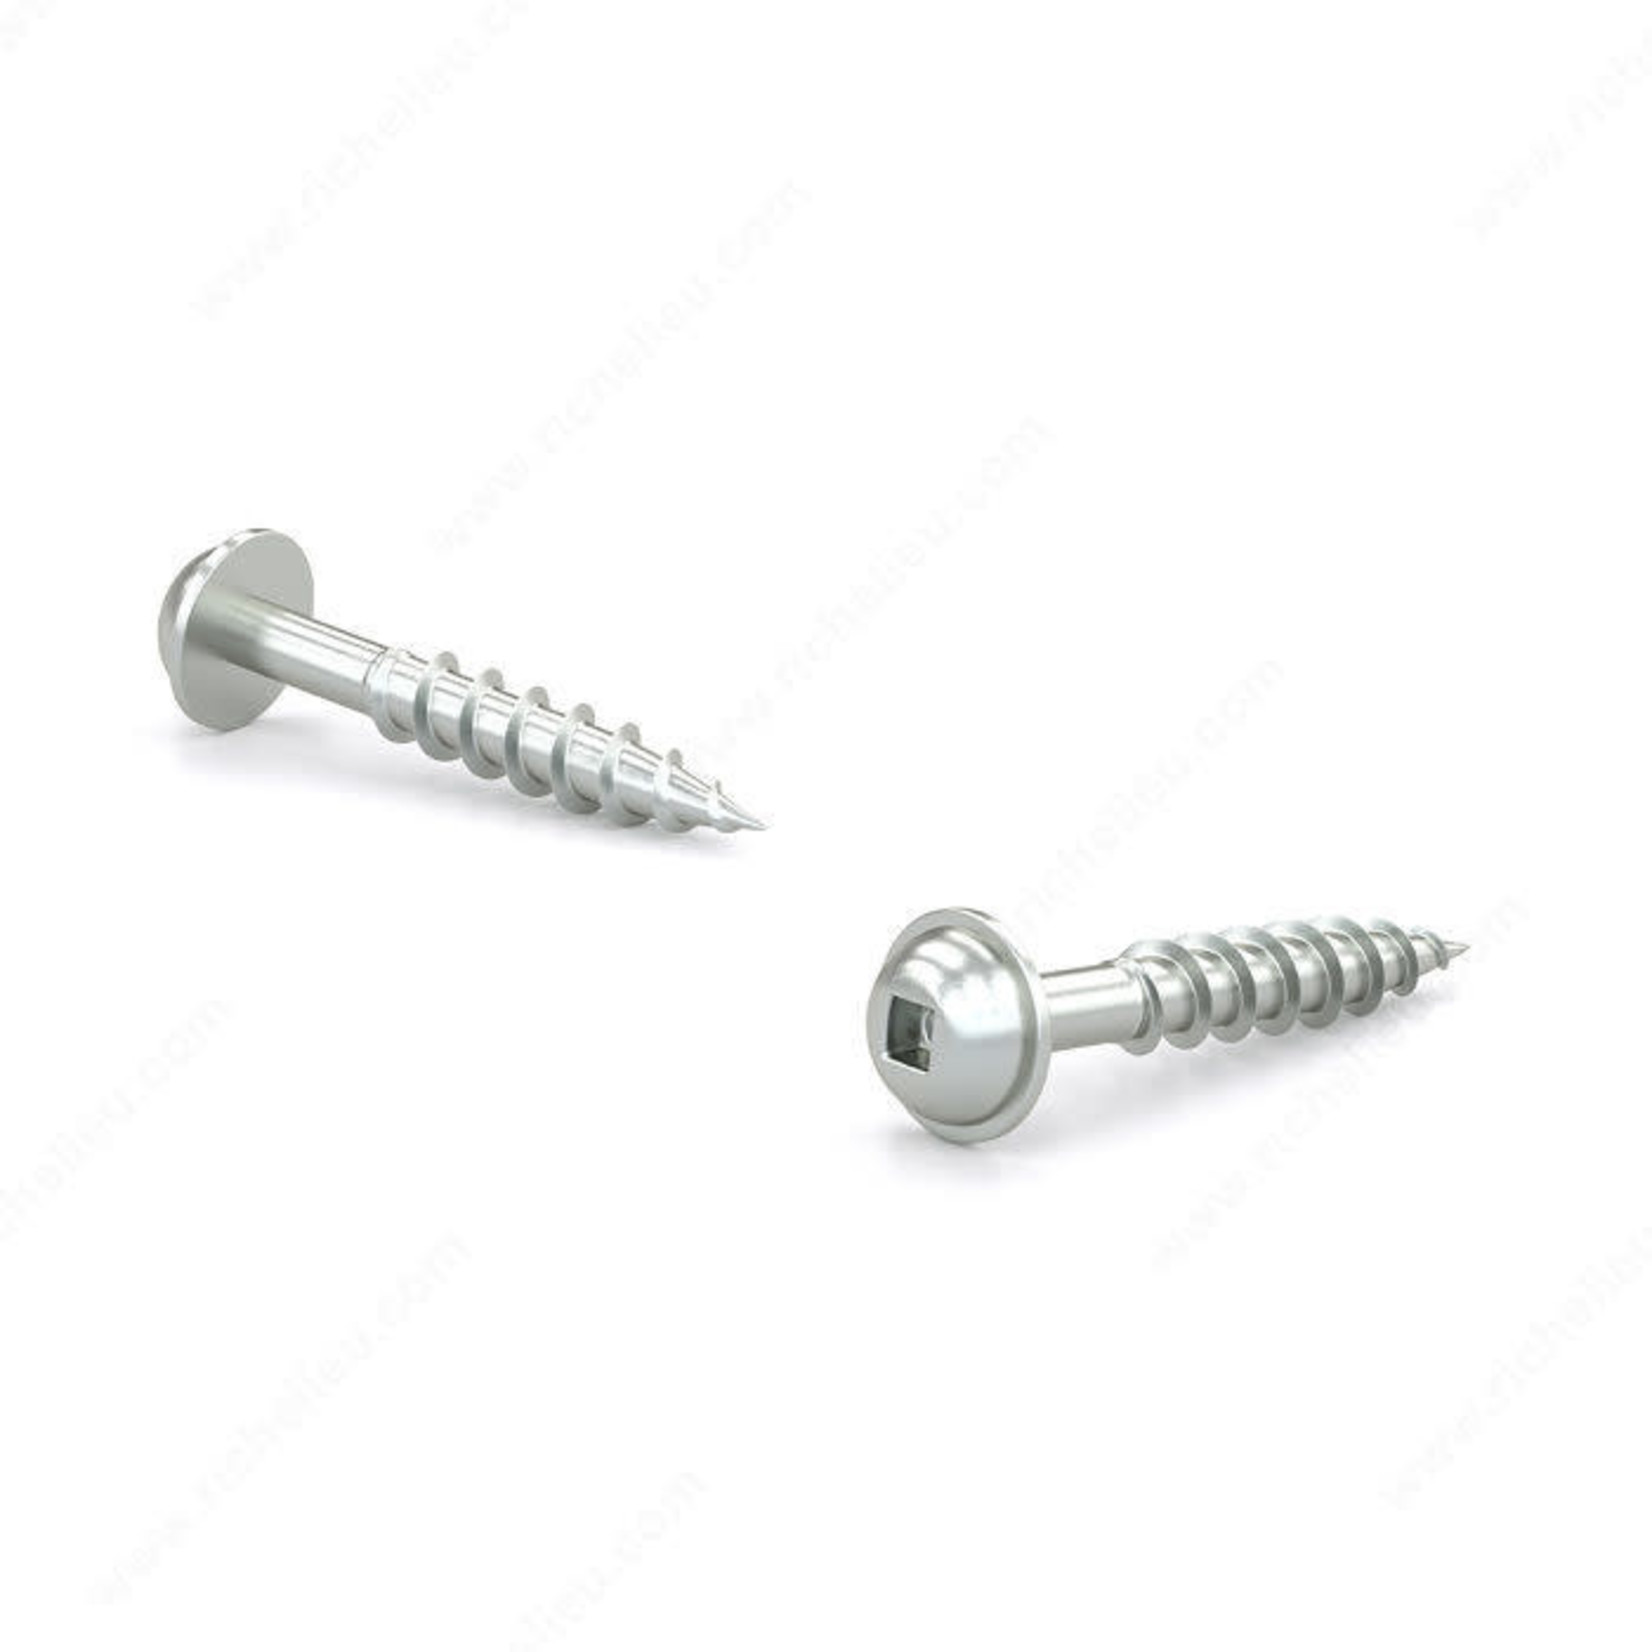 RELIABLE WOOD SCREW, PAN WASHER, COURSE THREAD, #8 2-1/2IN, 100PK